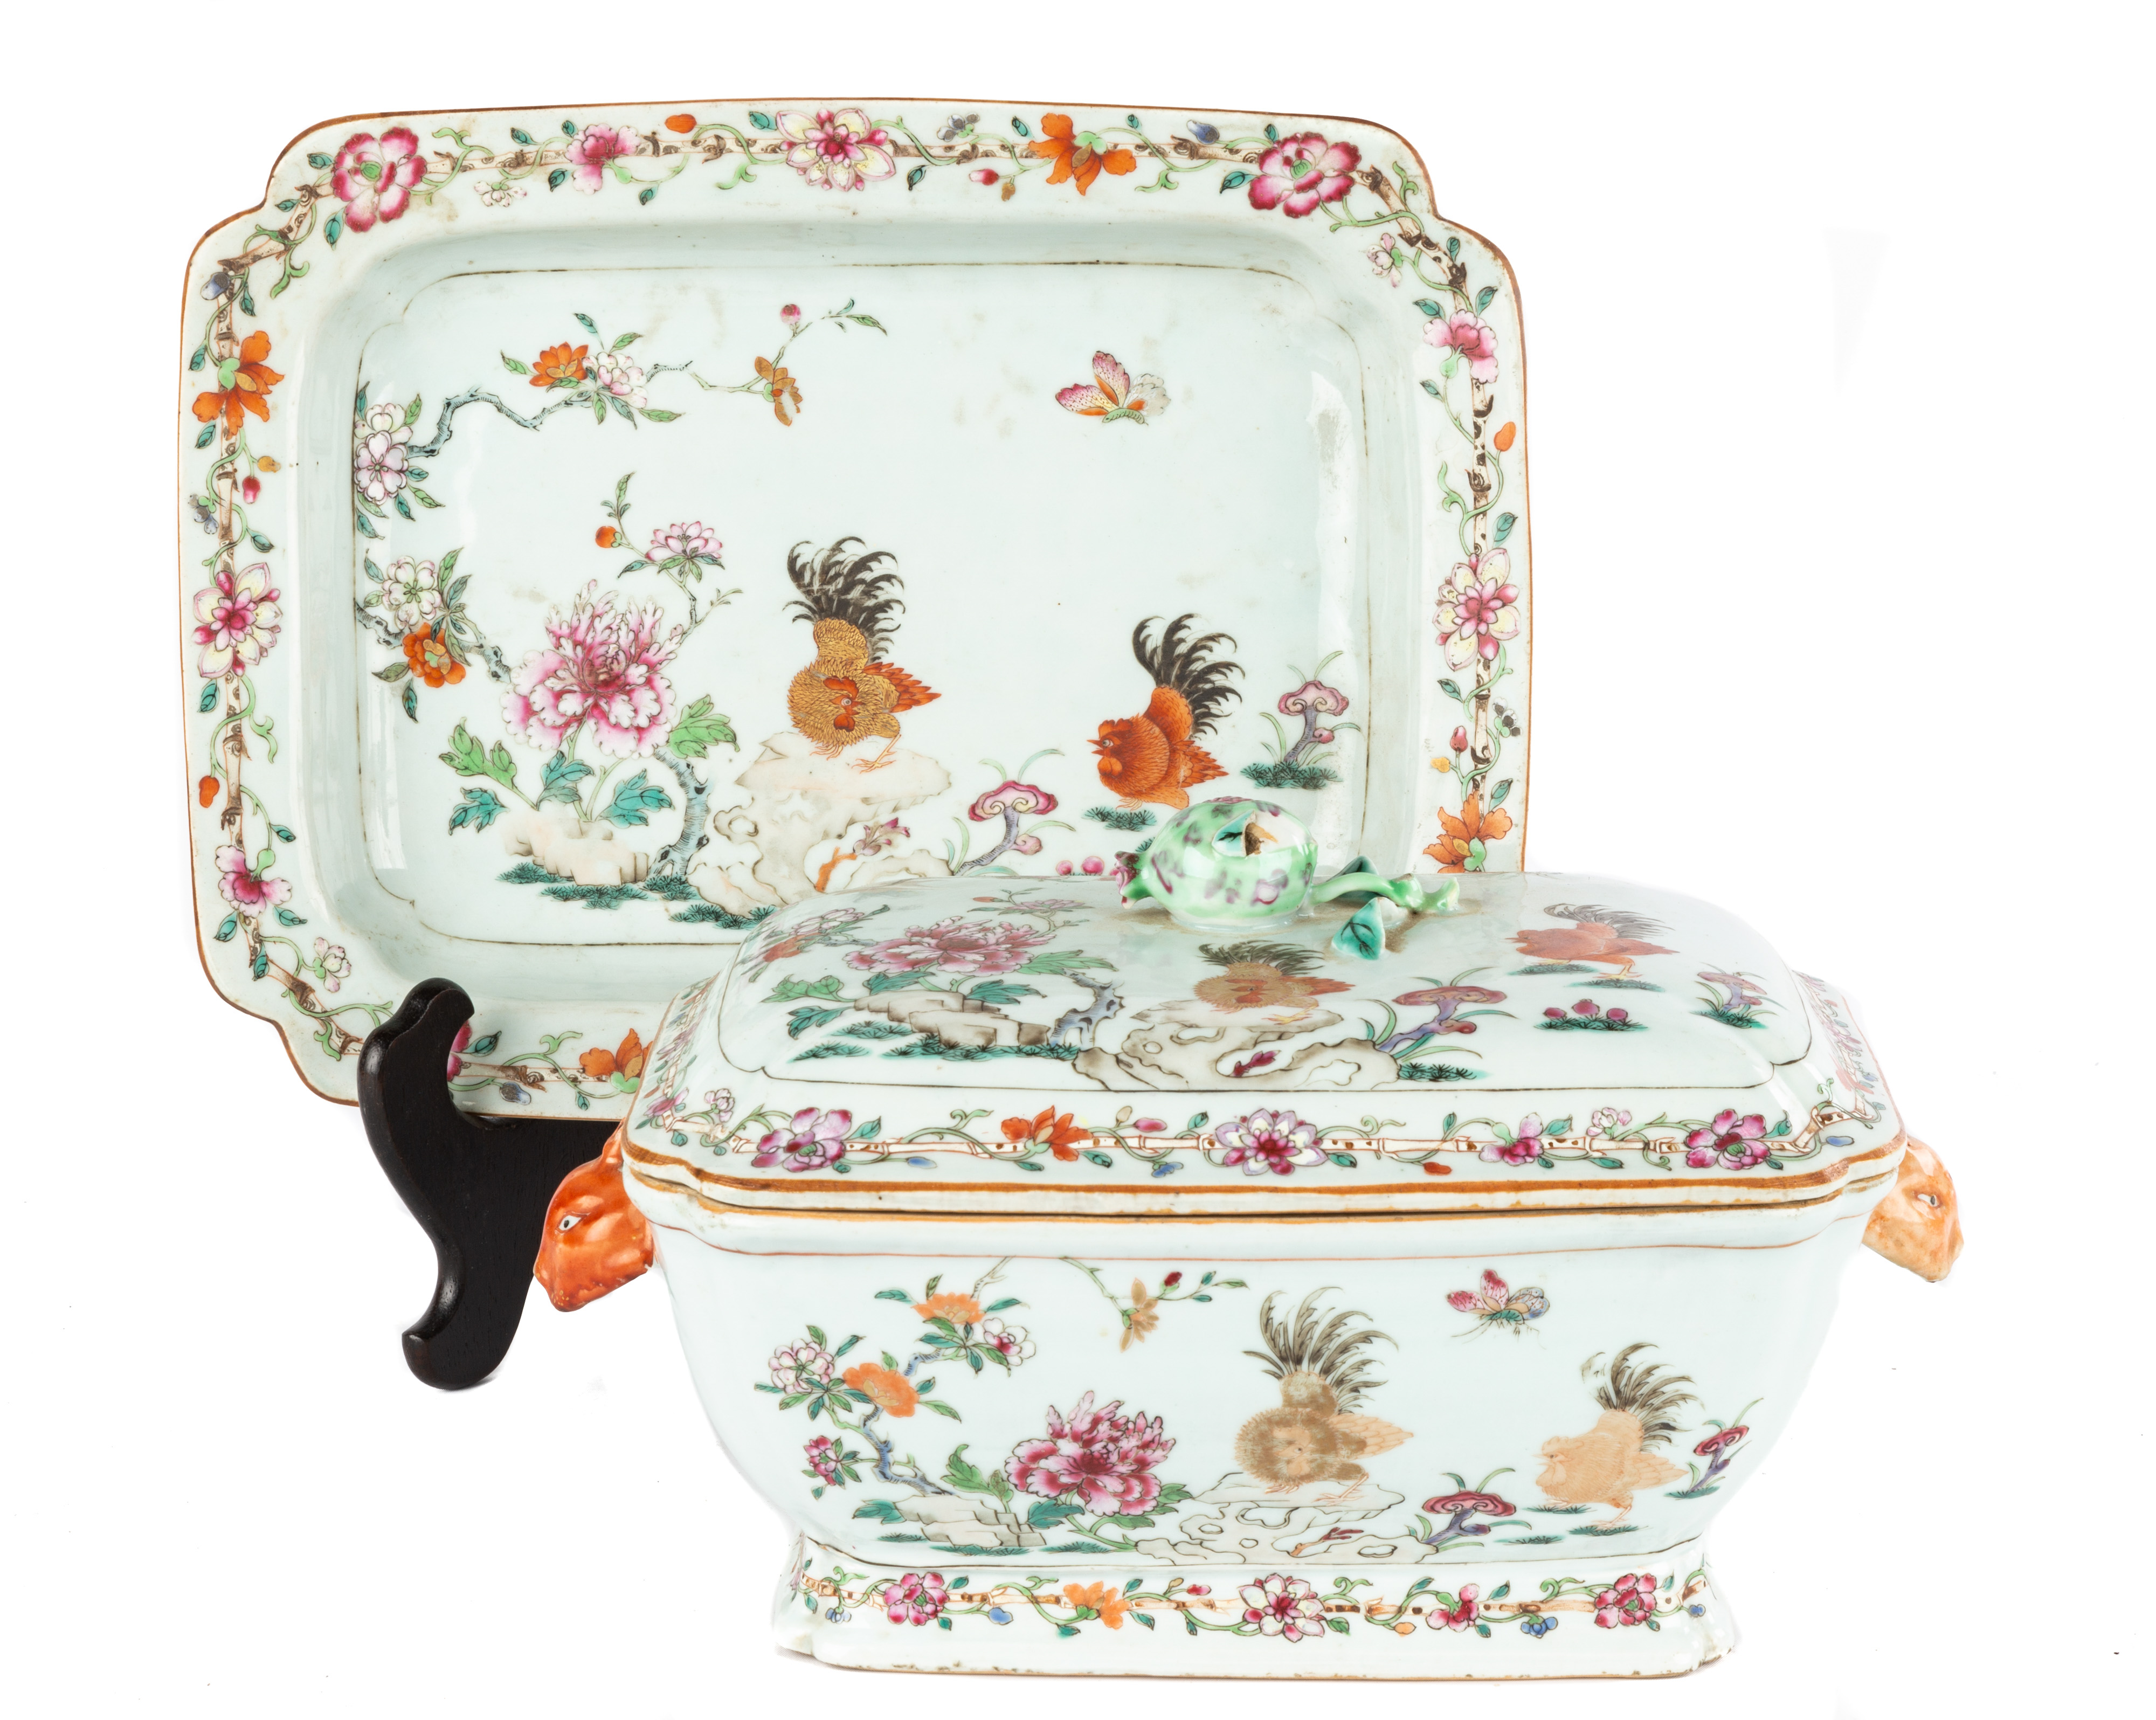 CHINESE EXPORT FAMILLE ROSE TUREEN 2c8956